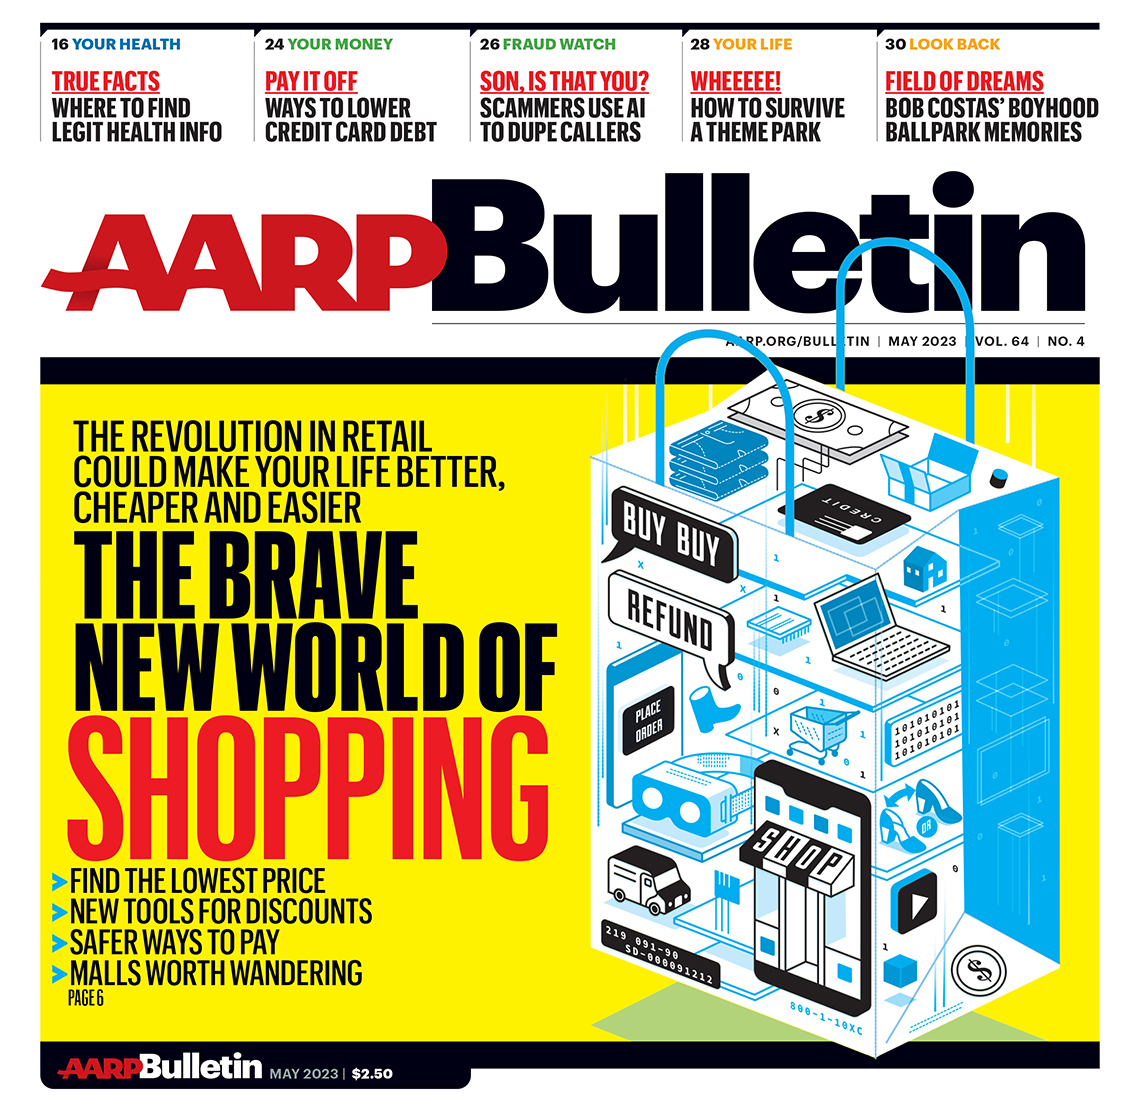 a a r p may 2023 bulletin cover; the brave new world of shopping